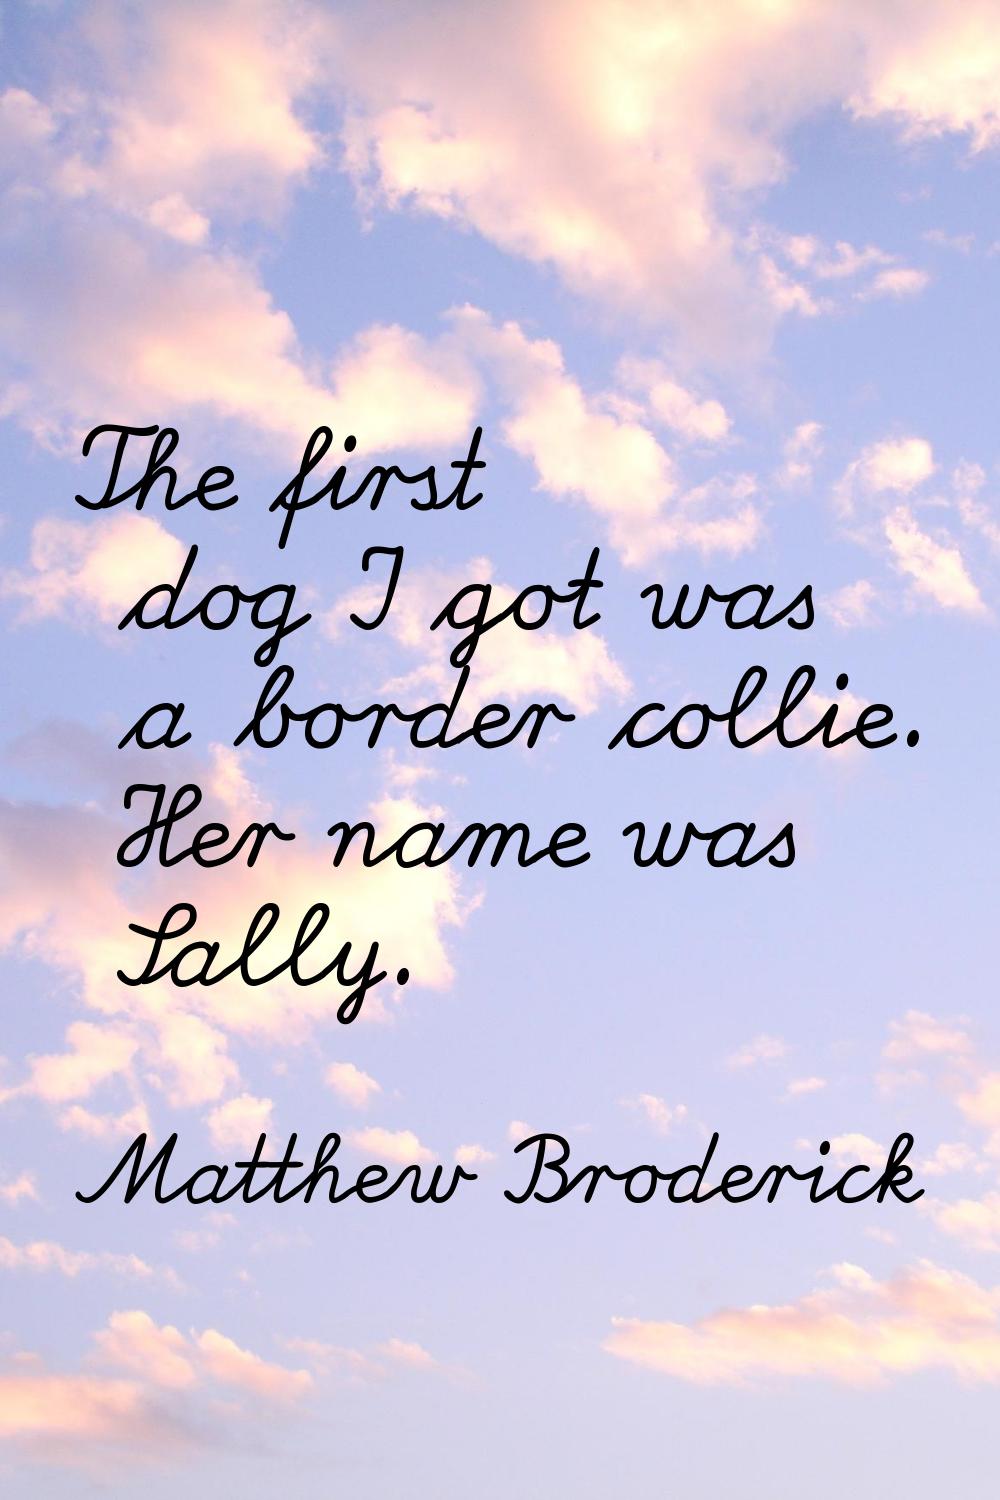 The first dog I got was a border collie. Her name was Sally.